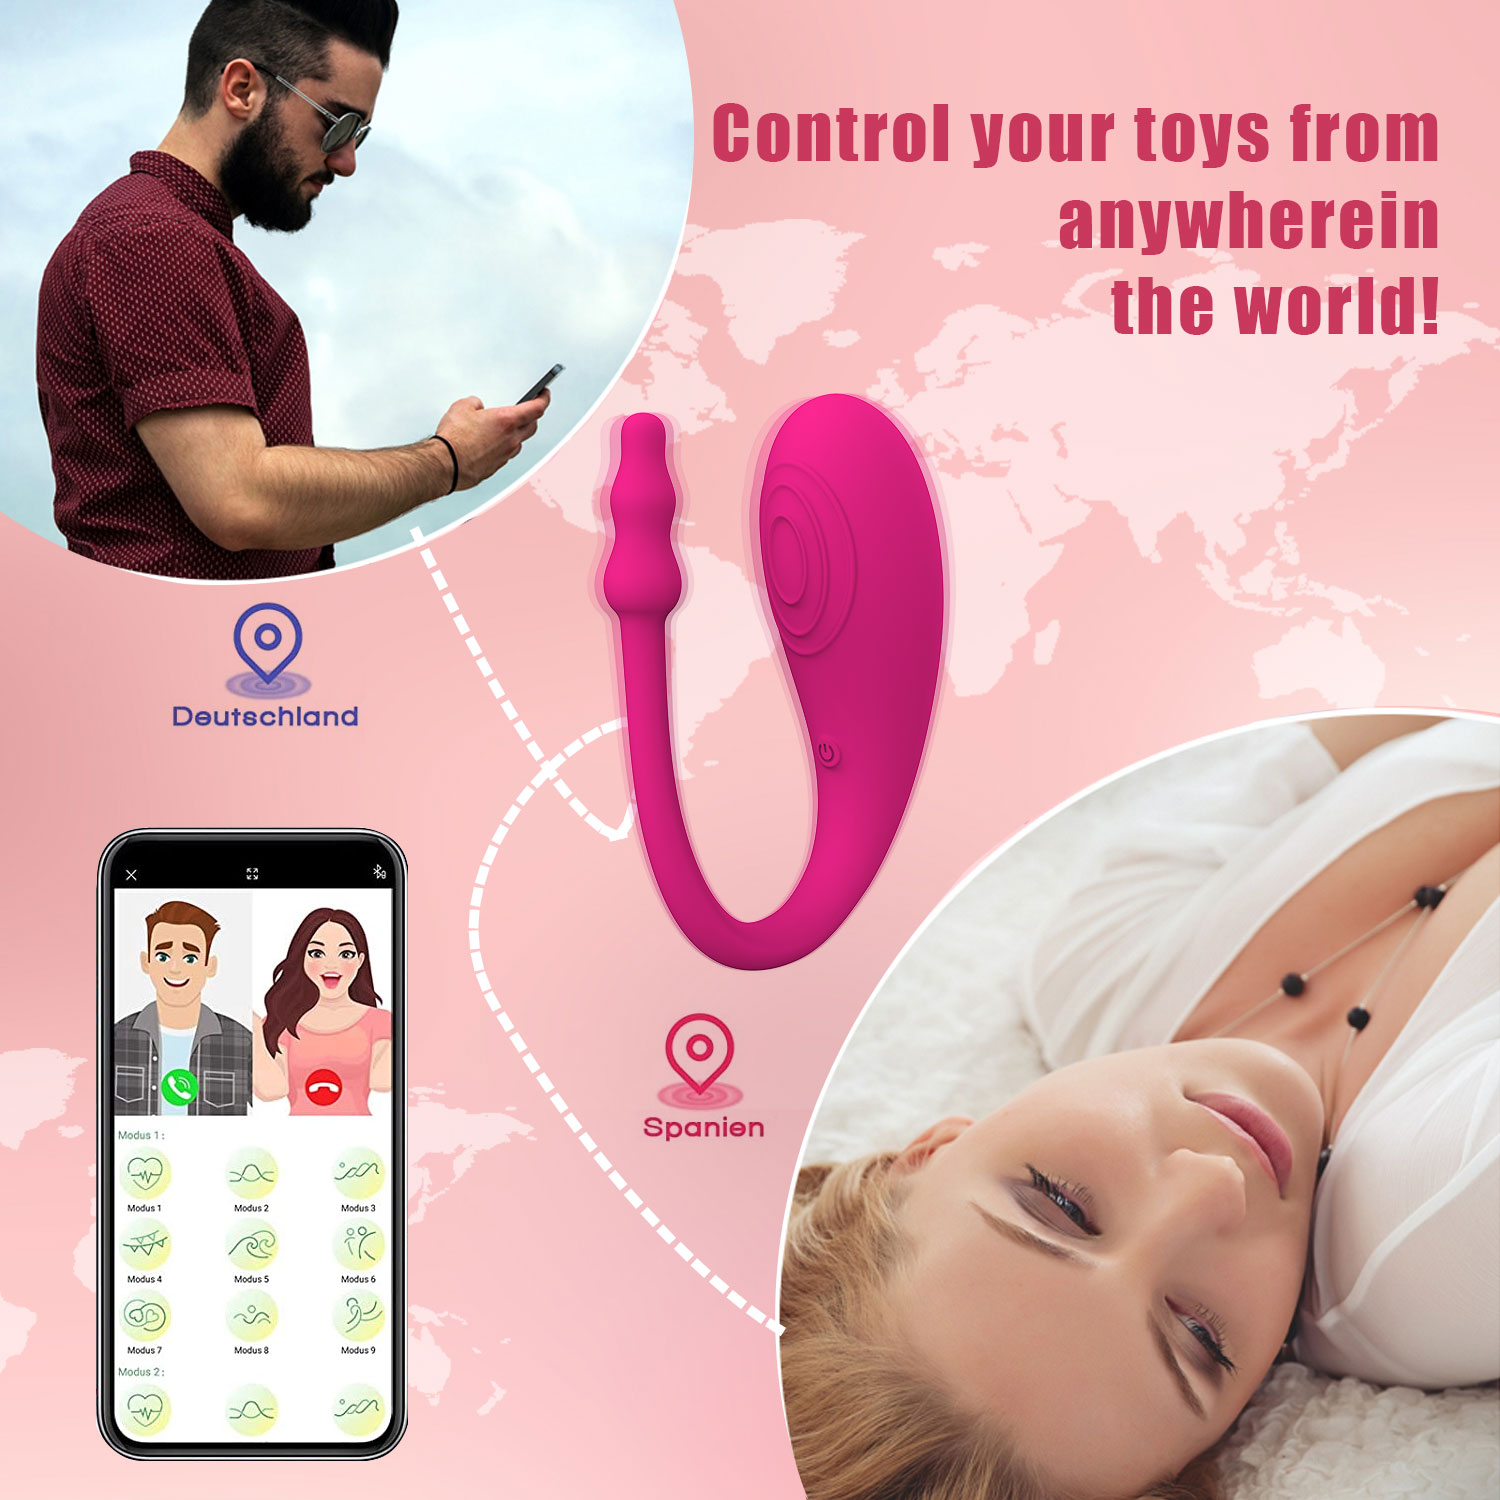 Rechargerable Adult Sex Toys More Than 10 Vibrations for Women And Couple